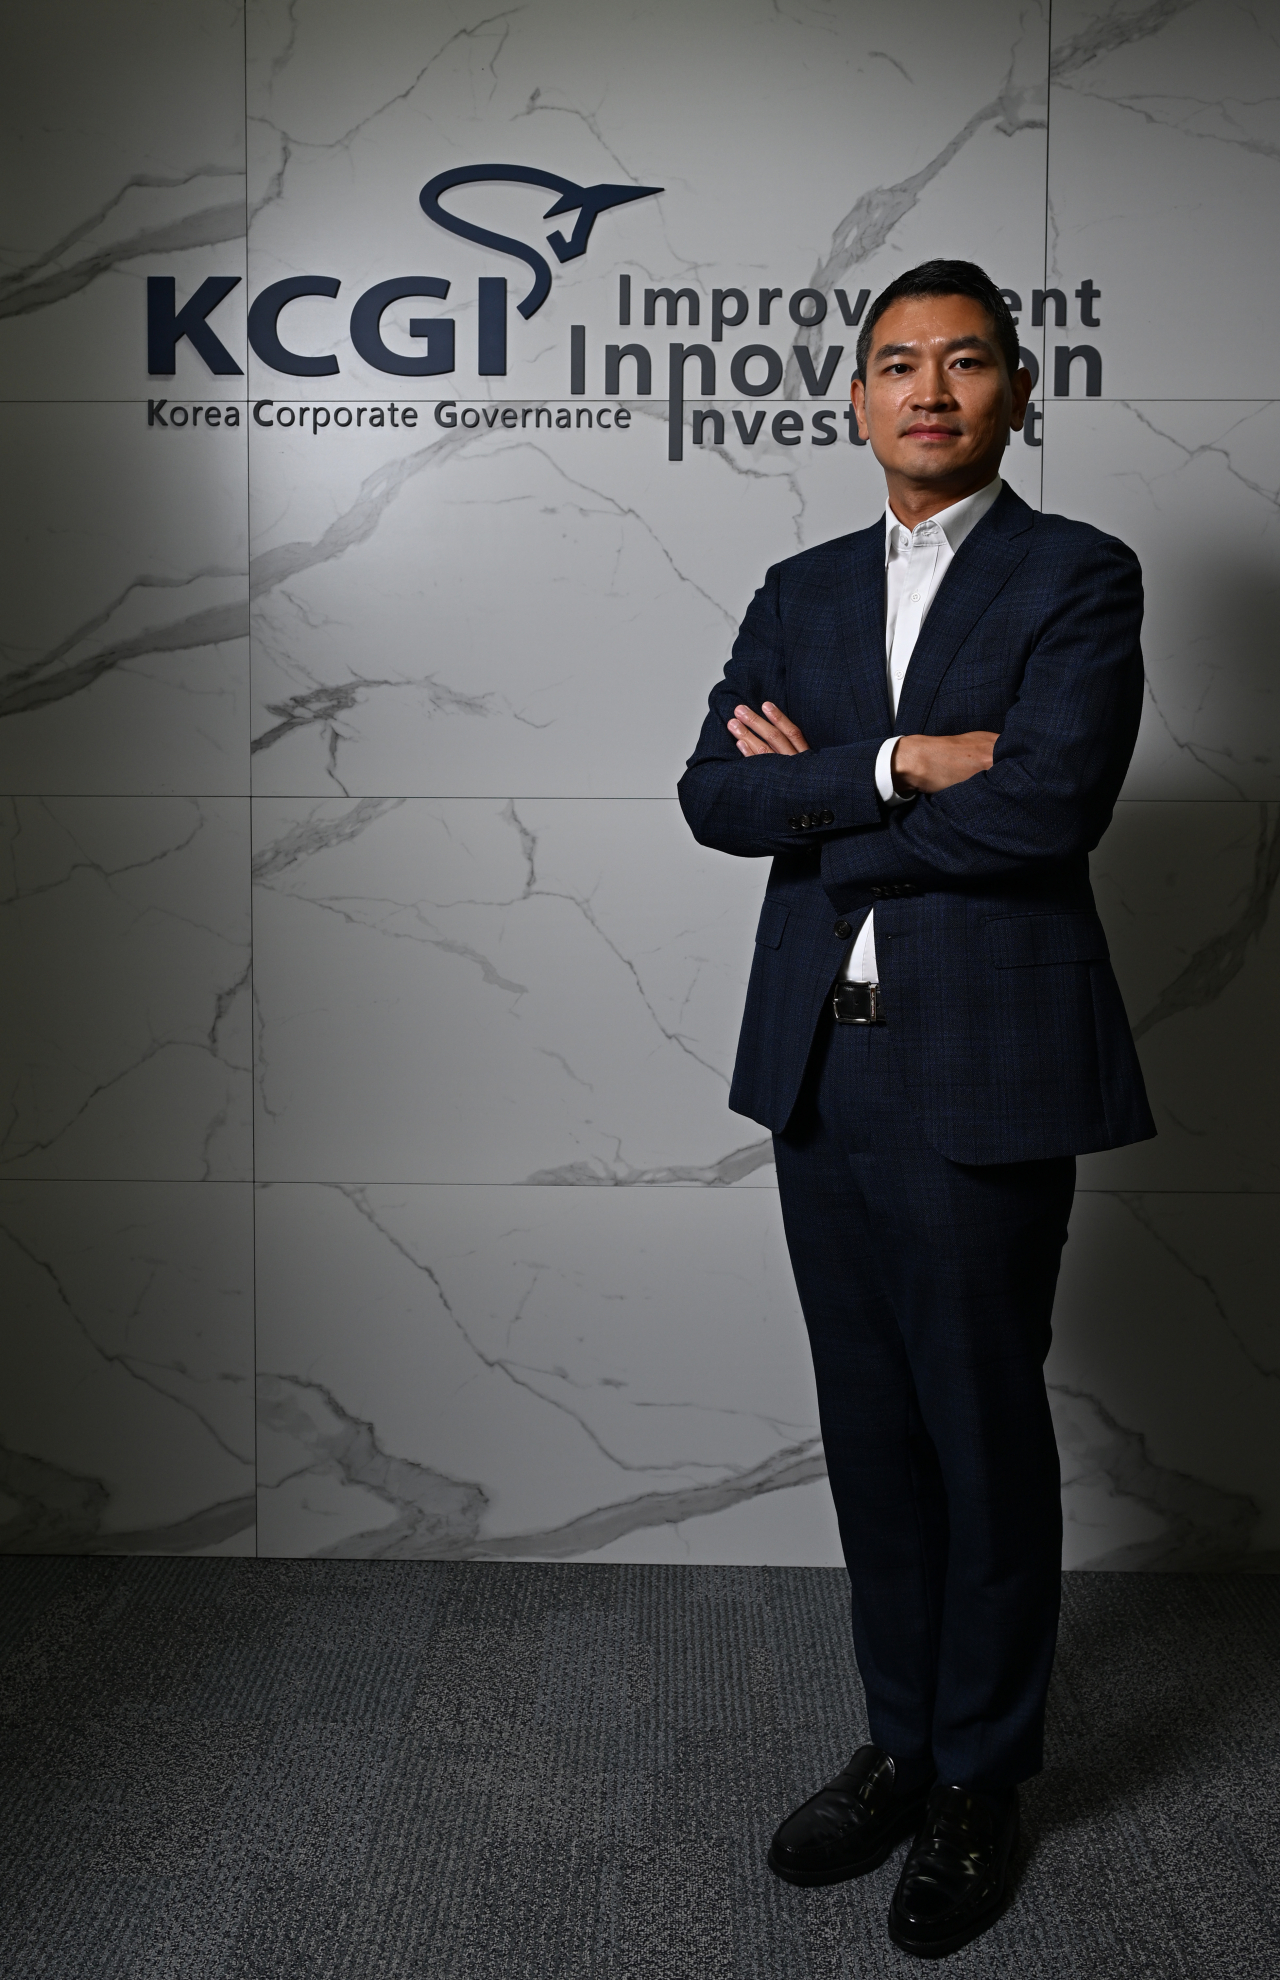 Korea Corporate Governance Improvement’s Managing Partner Lim Hyun-chol poses for a photo at the company's headquarters in Yeouido, Seoul, Tuesday. (Im Se-jun/The Korea Herald)